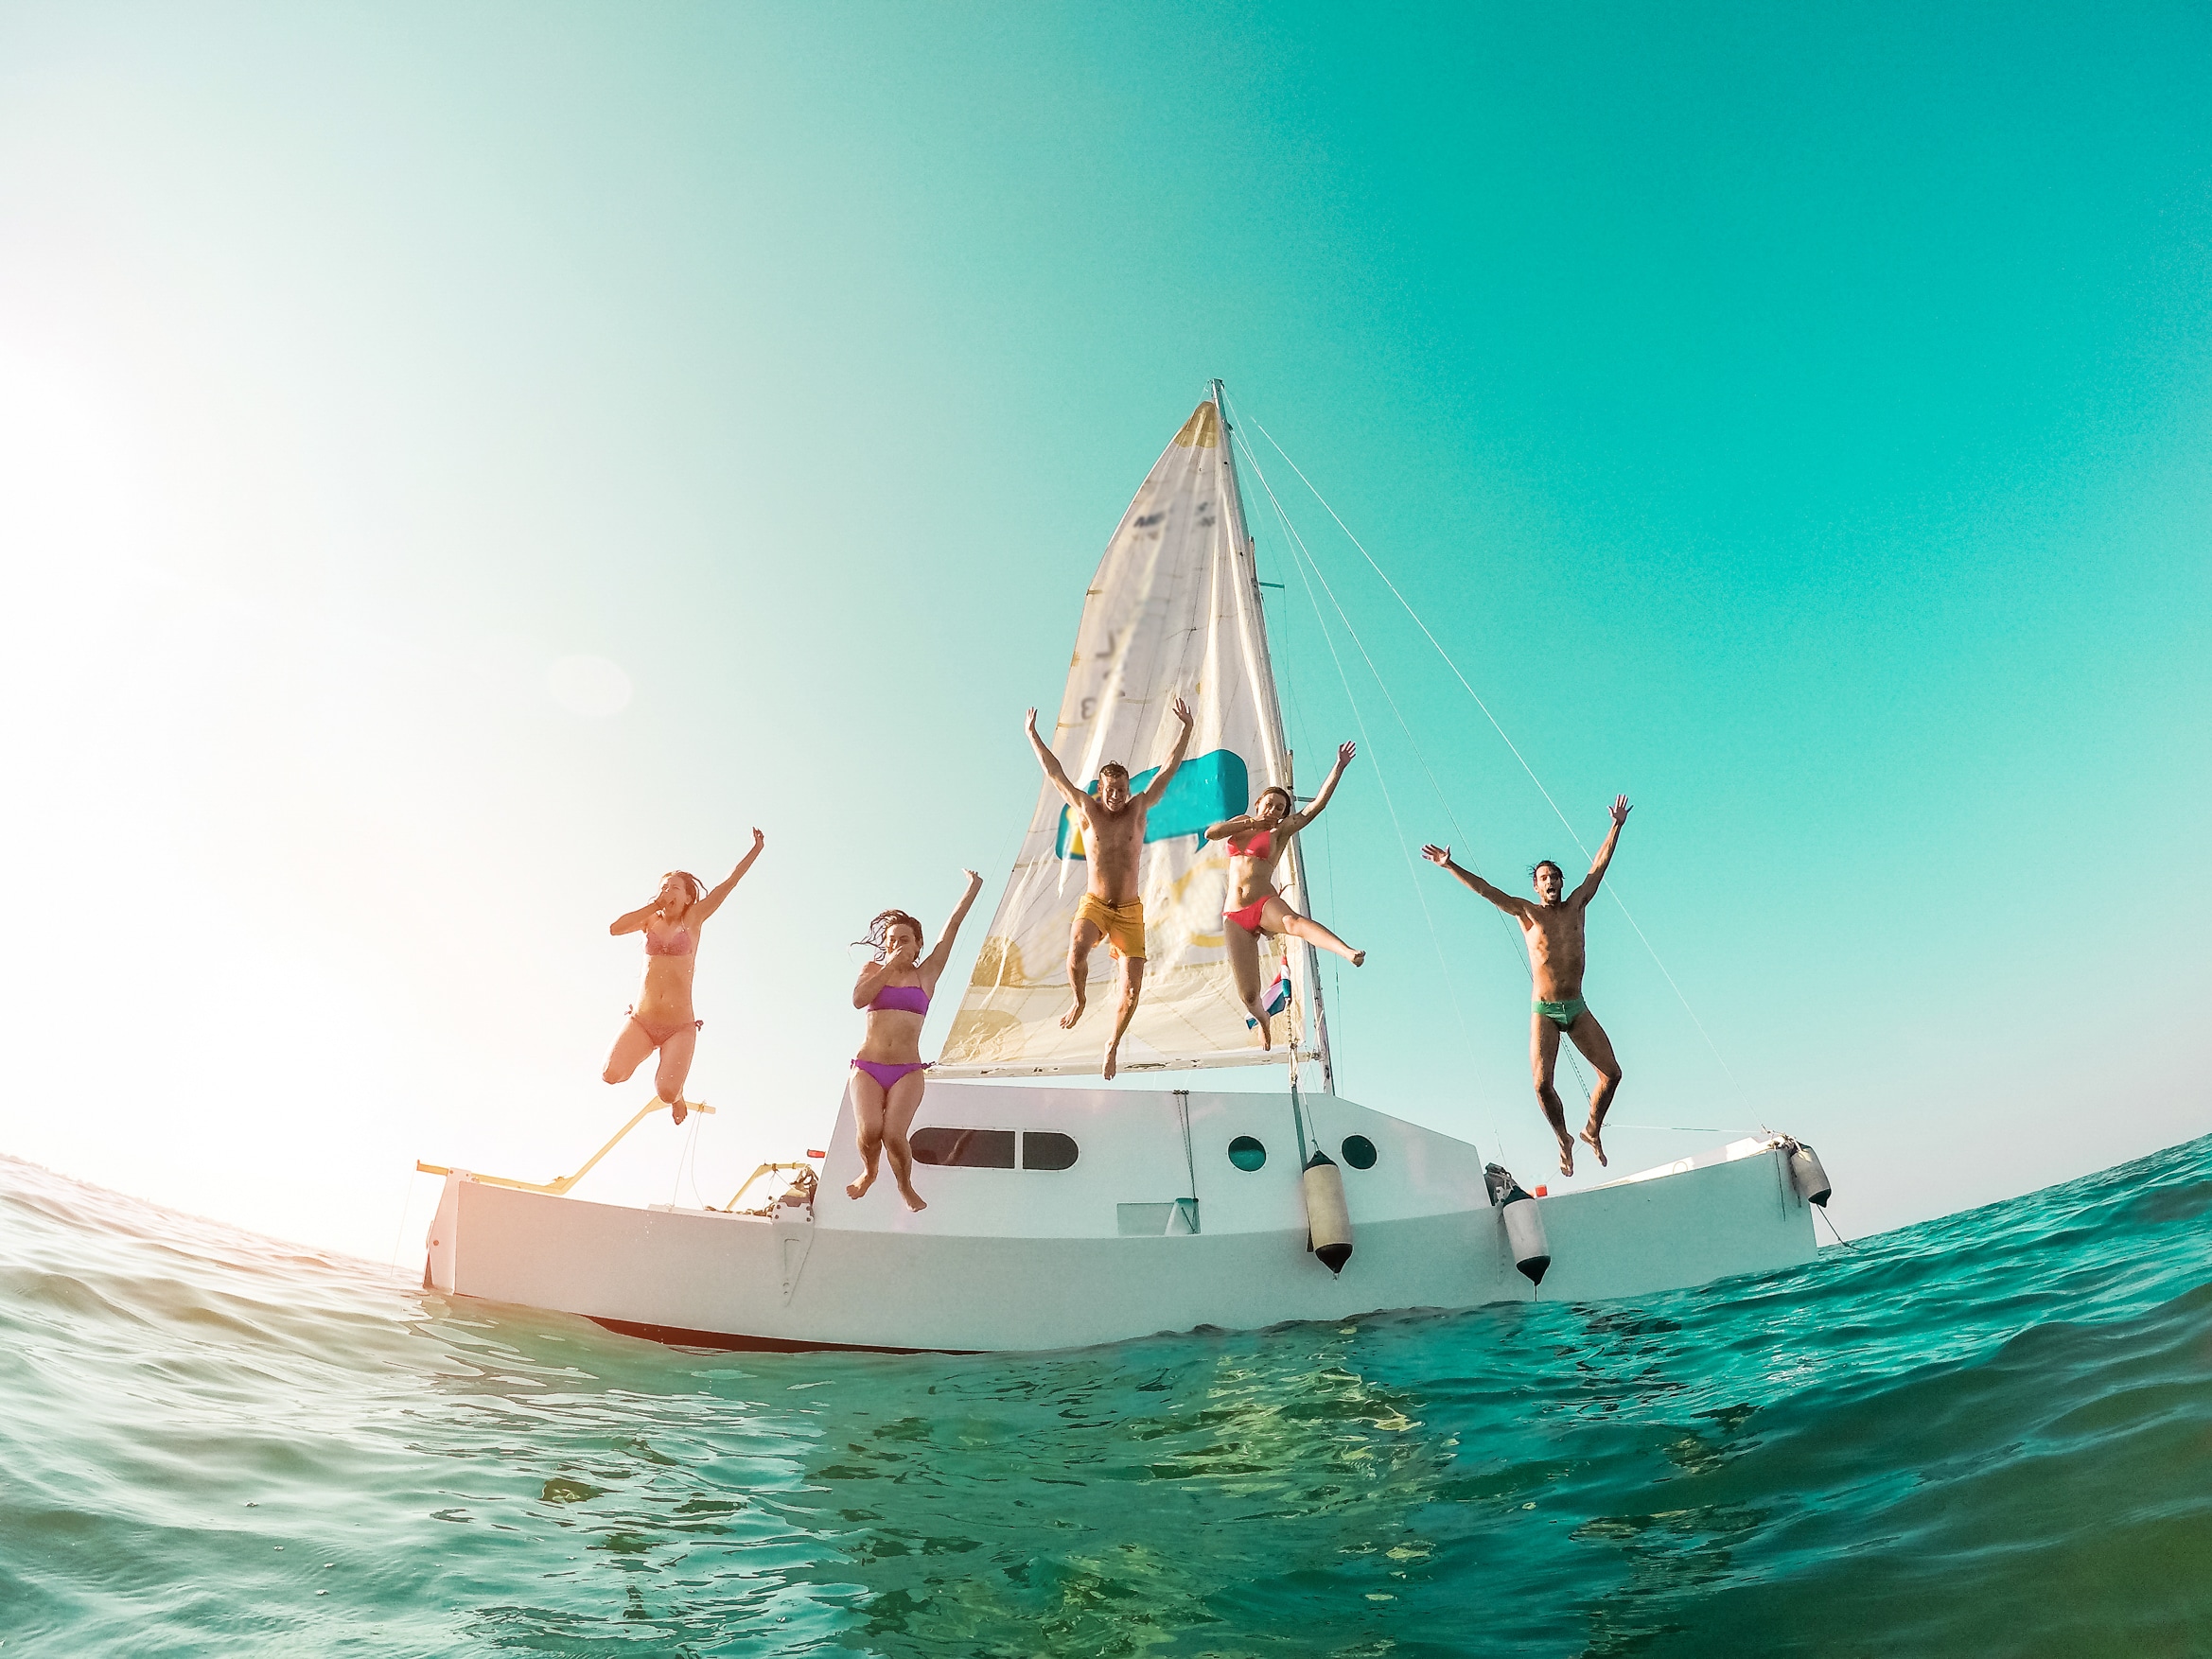 15 Things To Bring On Your Next Boat Trip